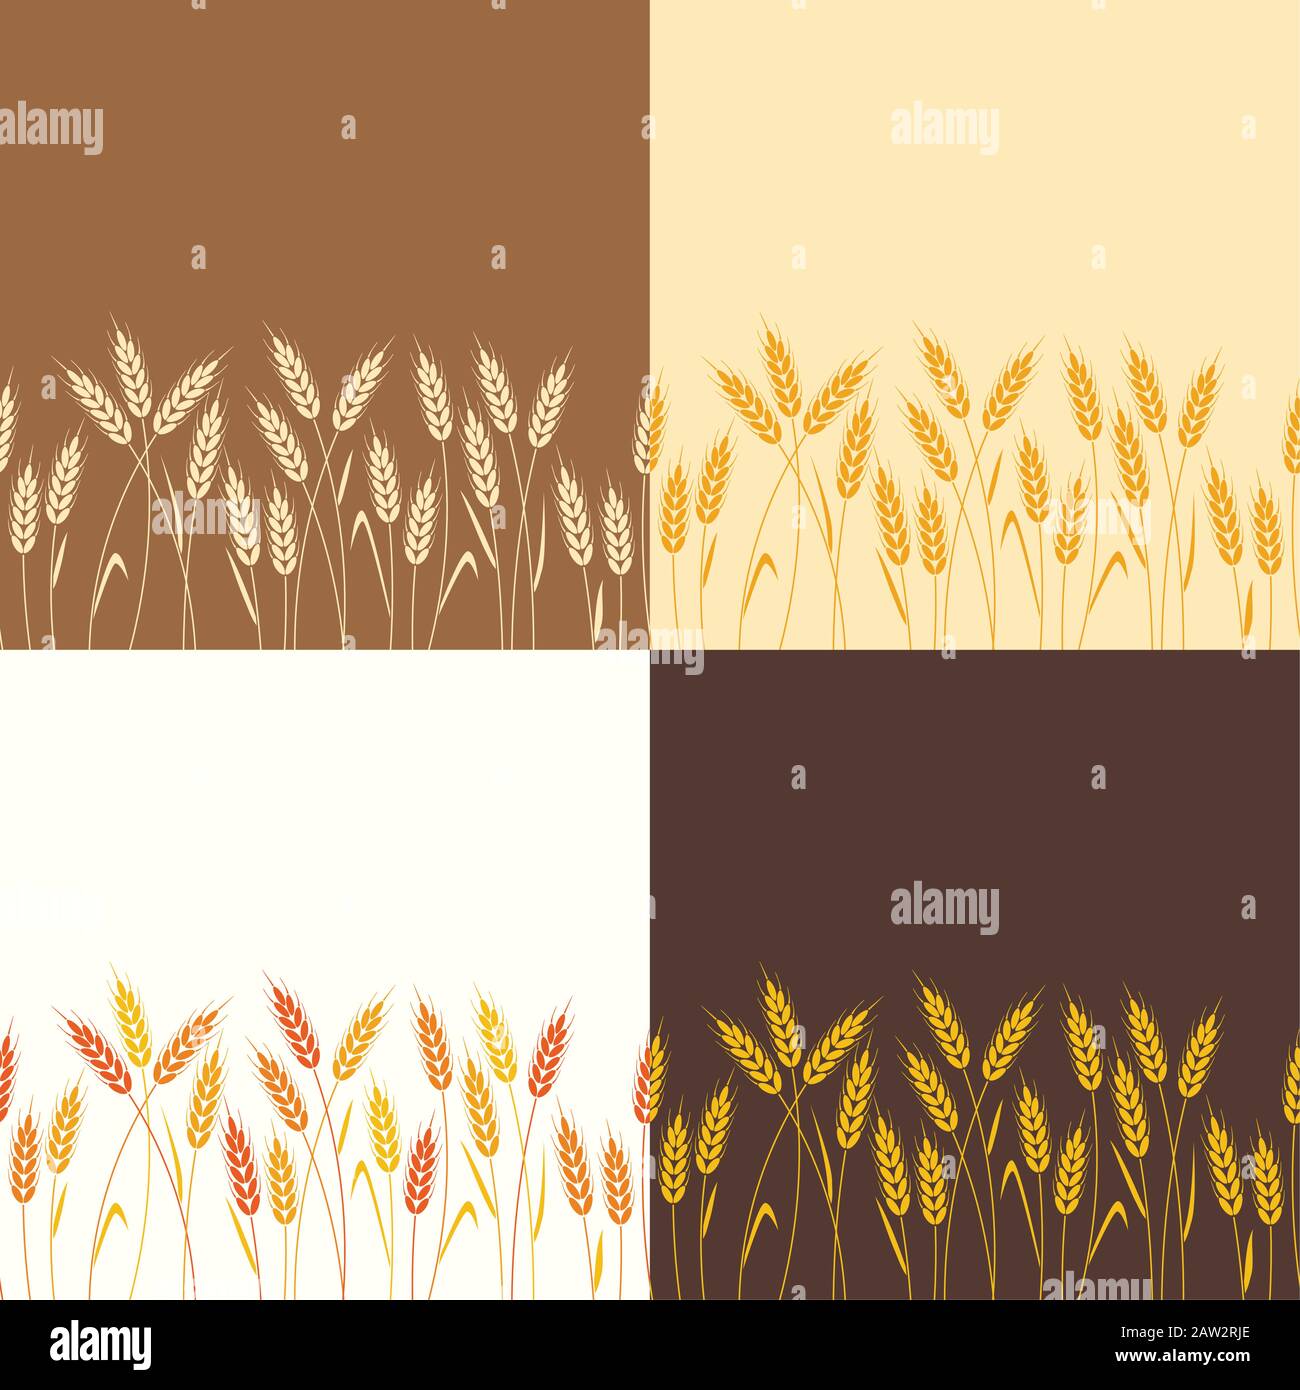 vector collection of seamless repeating wheat backgrounds Stock Vector